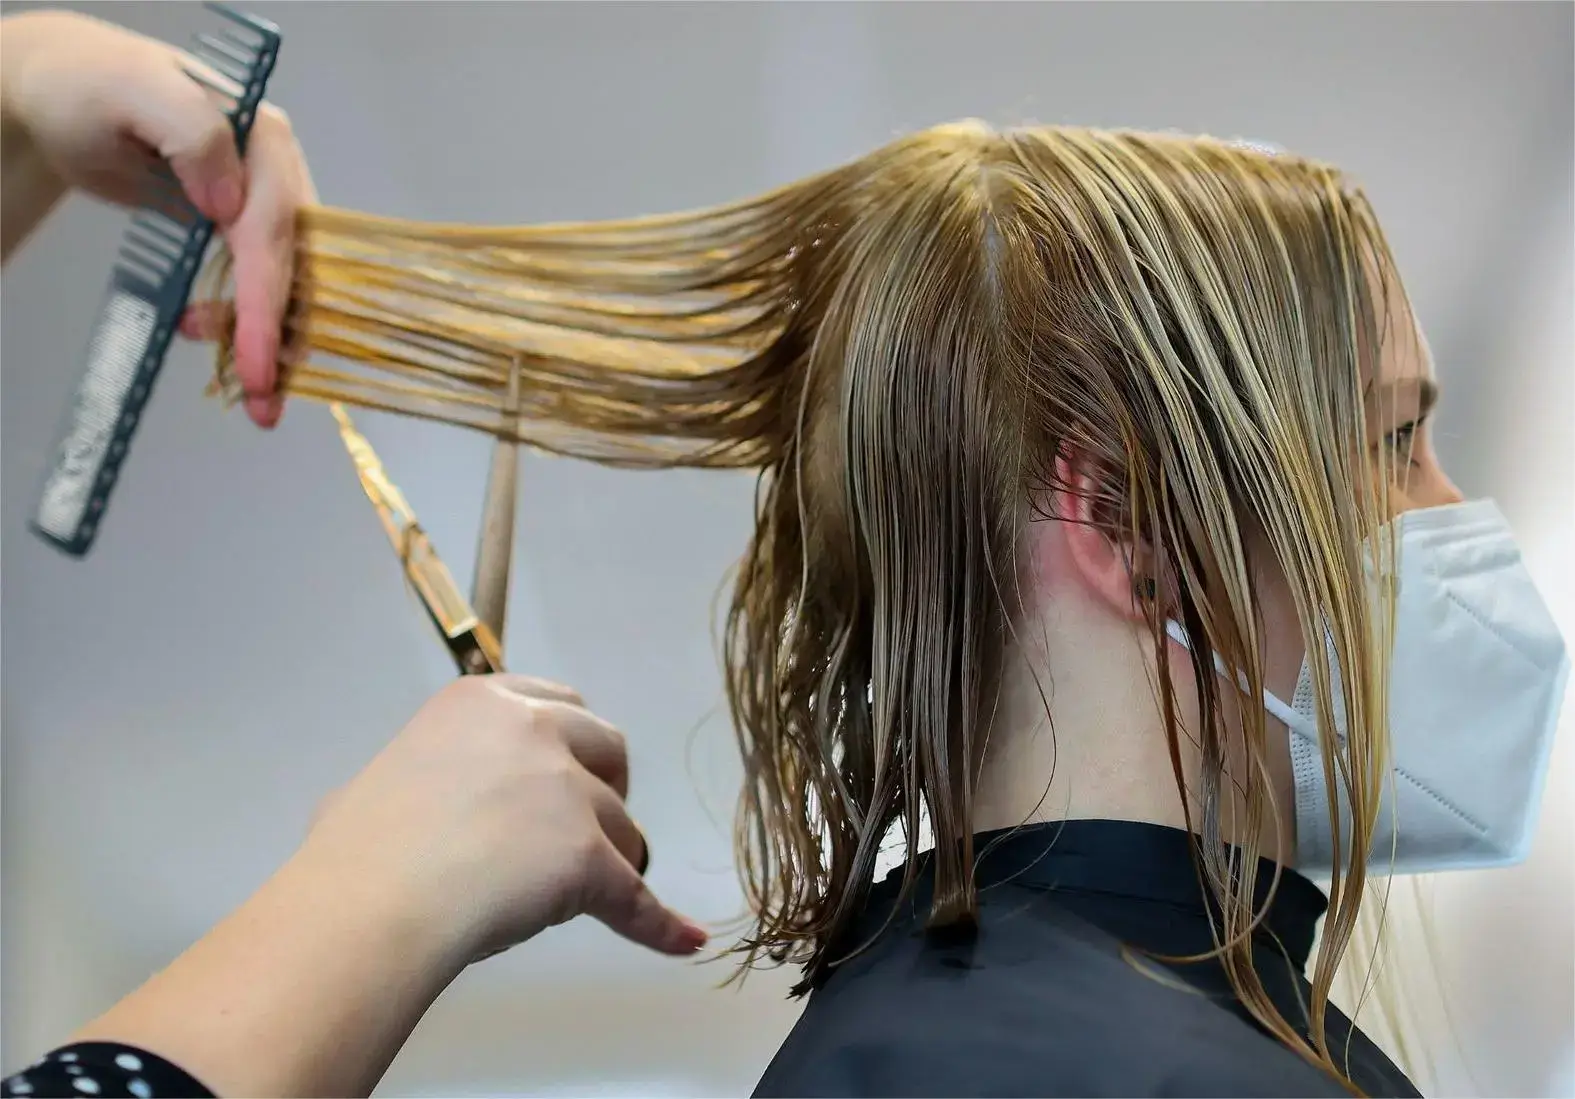 Hairdresser cutting wet hair with mask on.